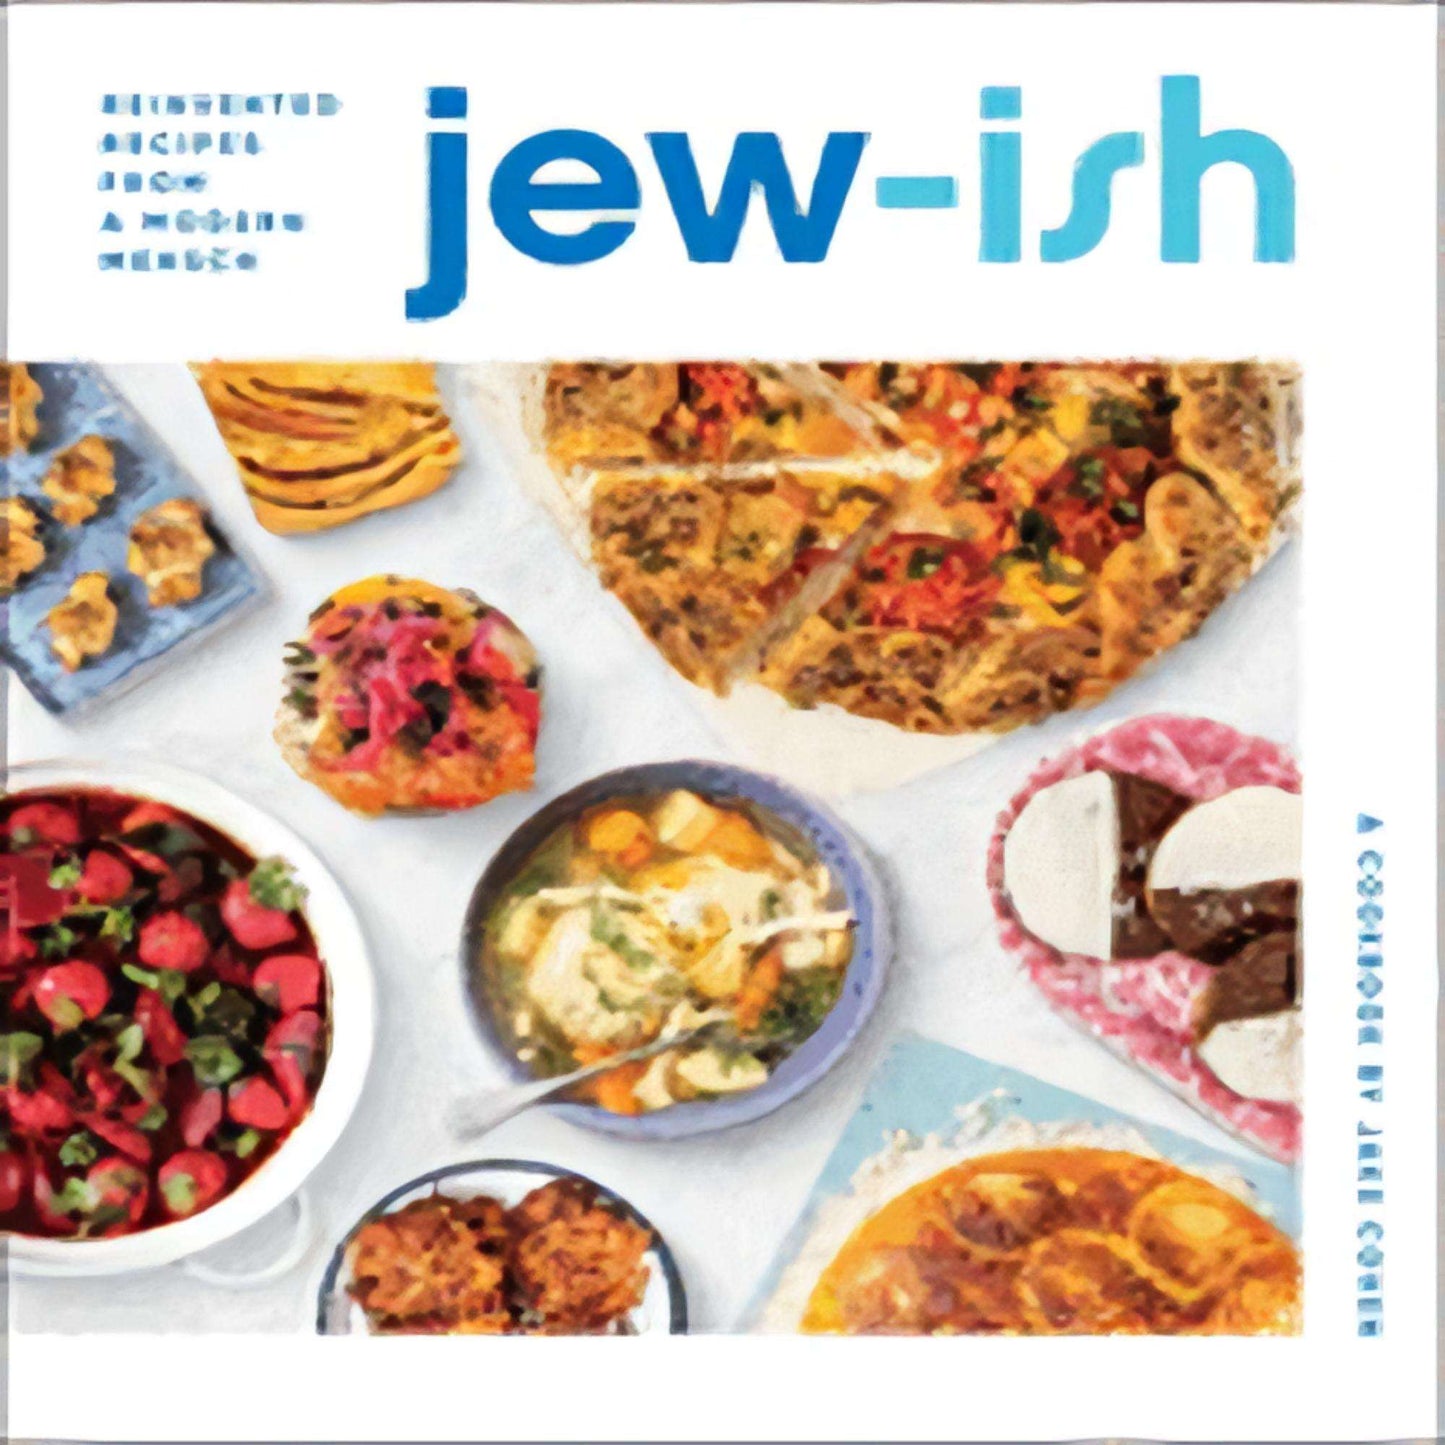 TEXTBOOK Jew-Ish: A Cookbook: Reinvented Recipes from a Modern Mensch175-022823- 035835398XDPGBOOKSTORE.COM. Today's Bestsellers.